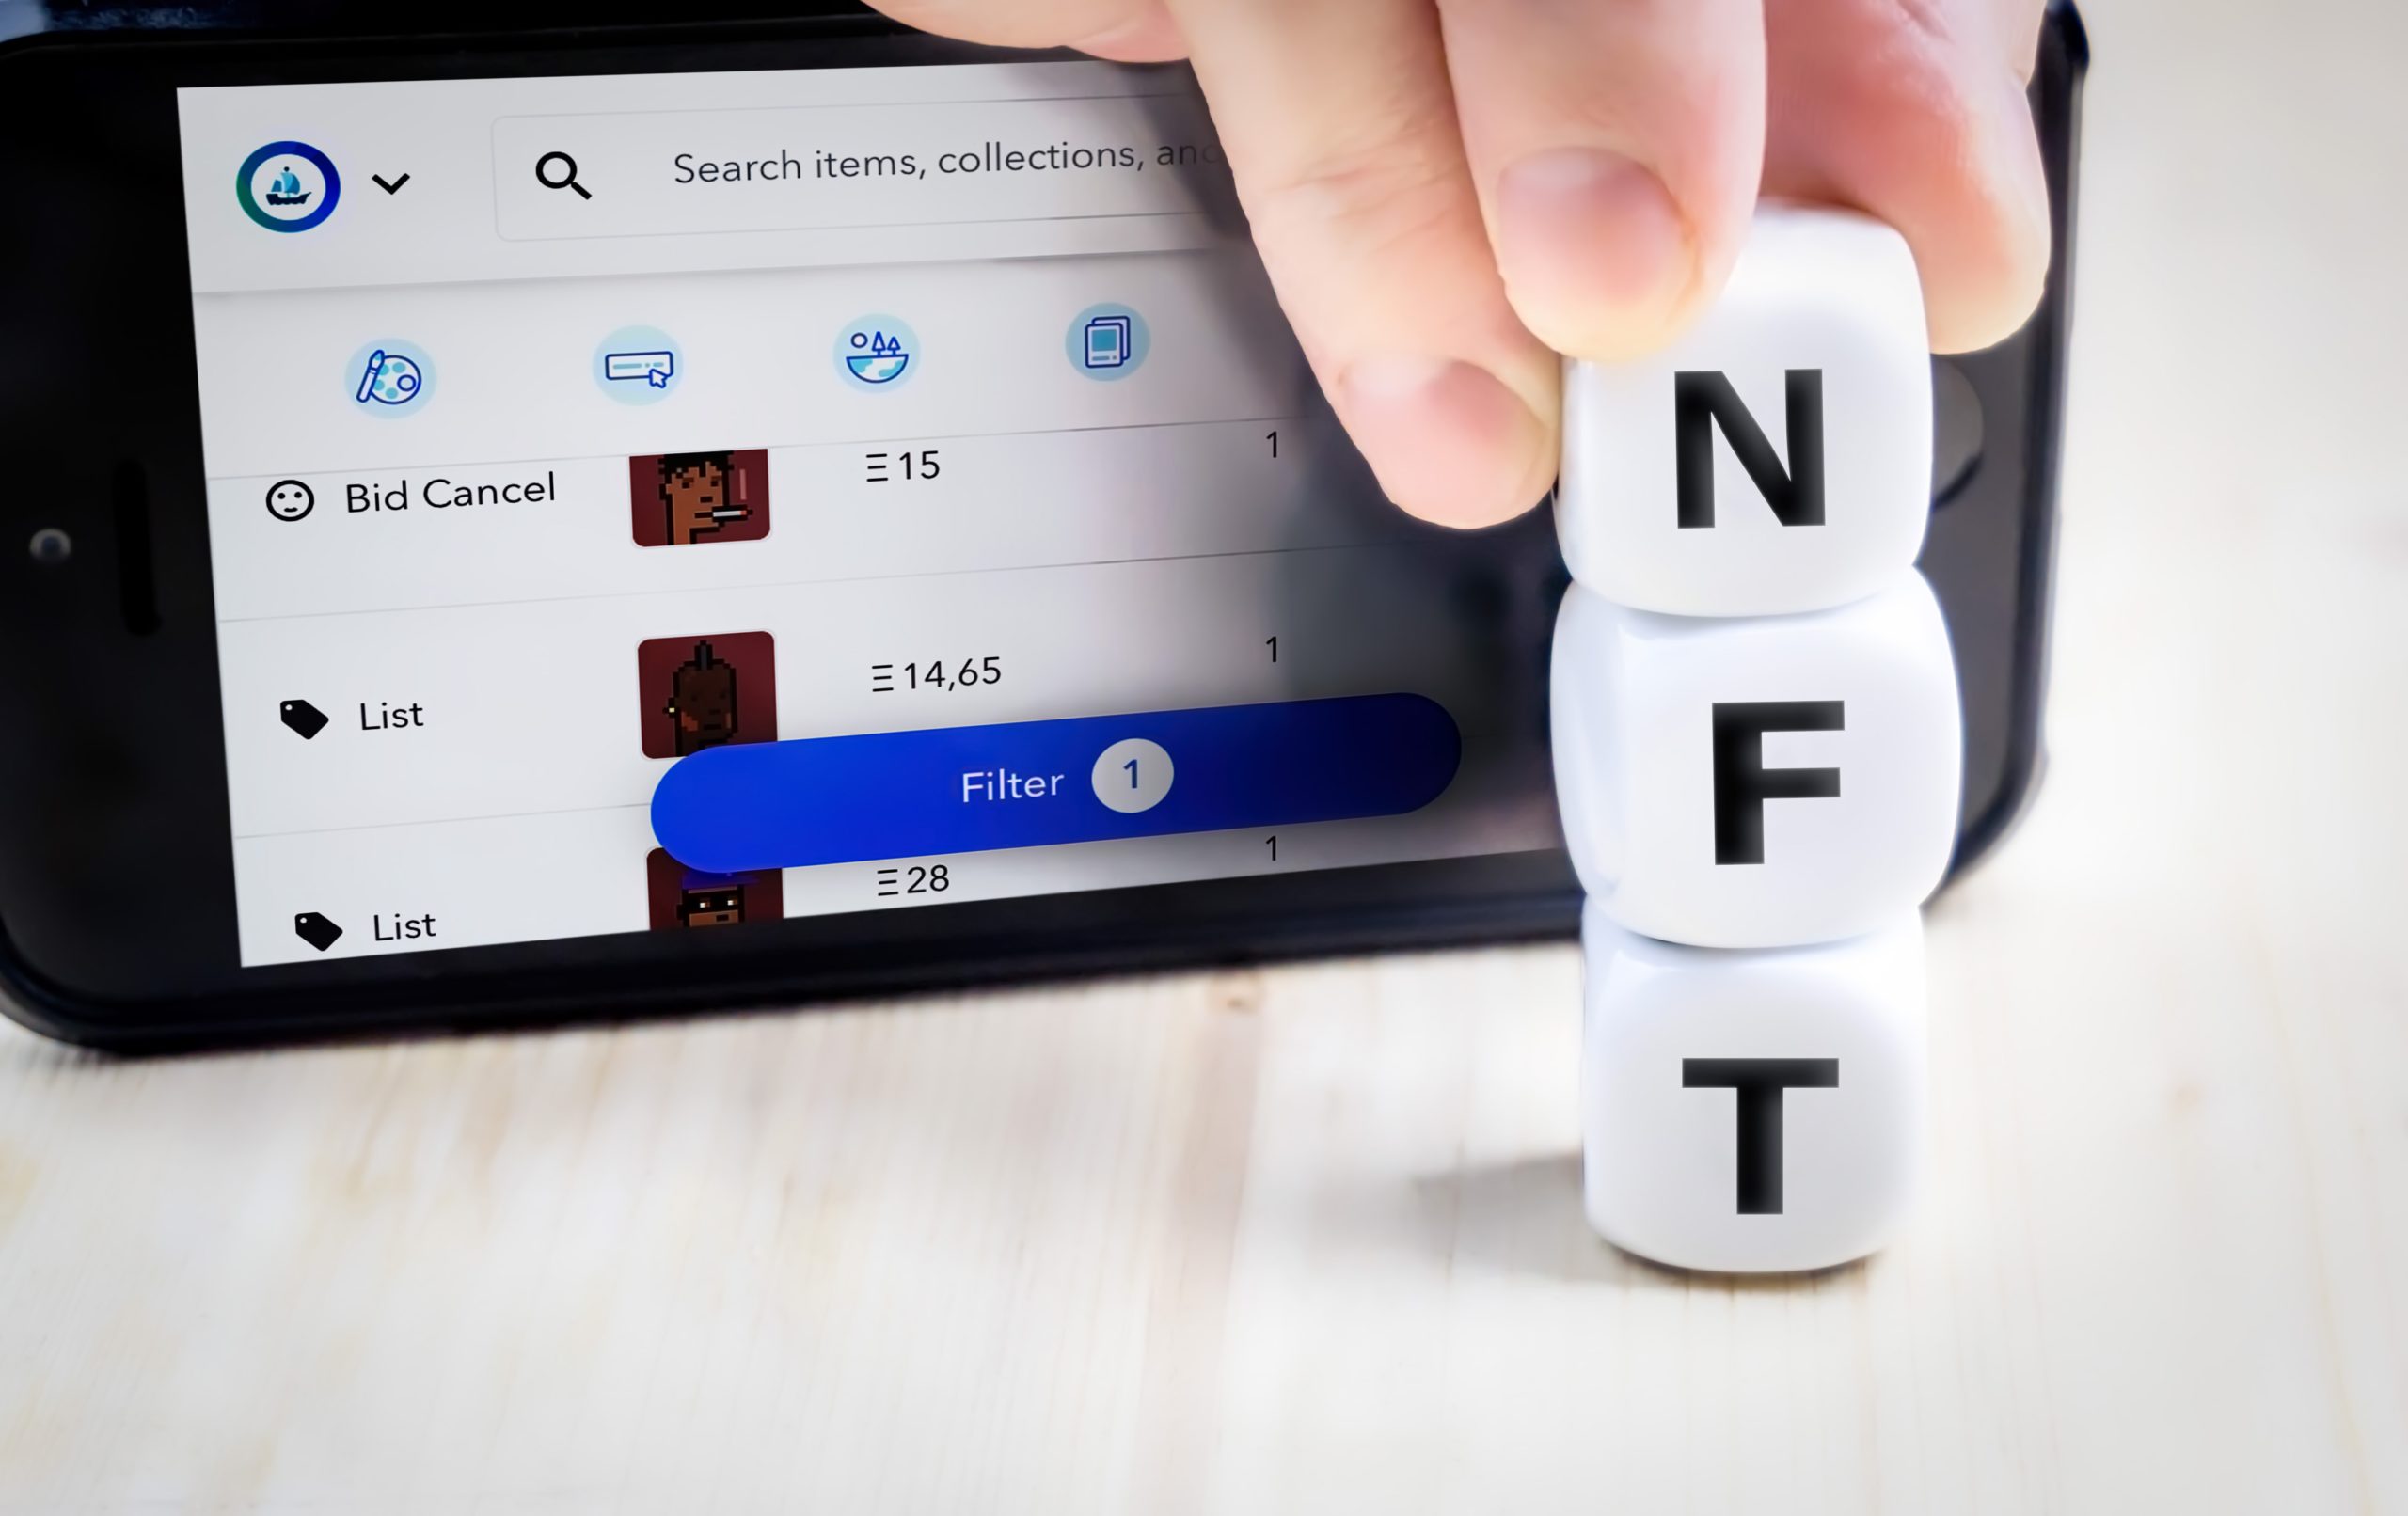 blocks spelling out 'NFT' in front of a screen showing an NFT trading platform